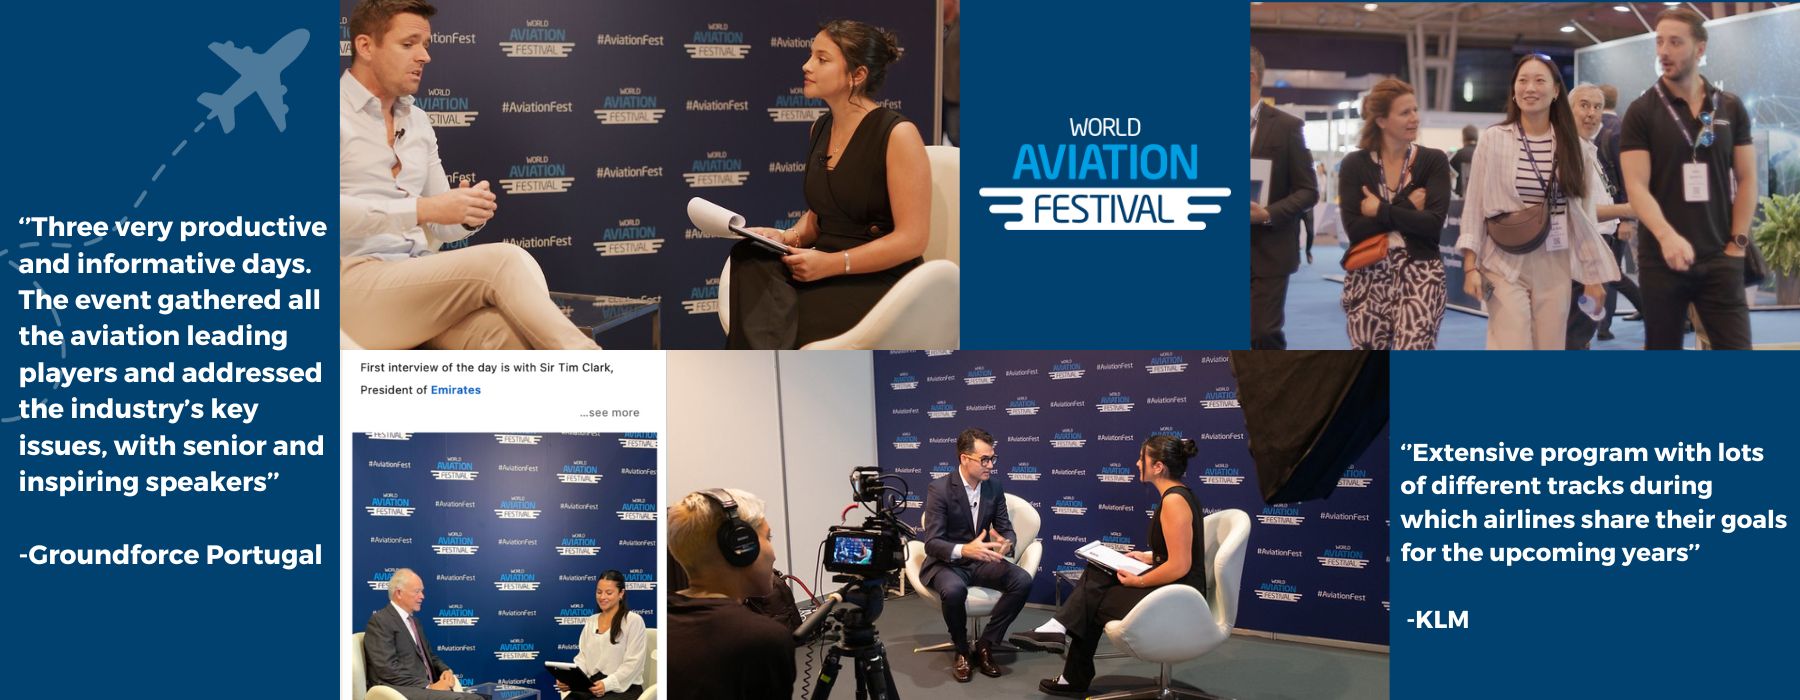 Apply for a free press pass at World Aviation Festival